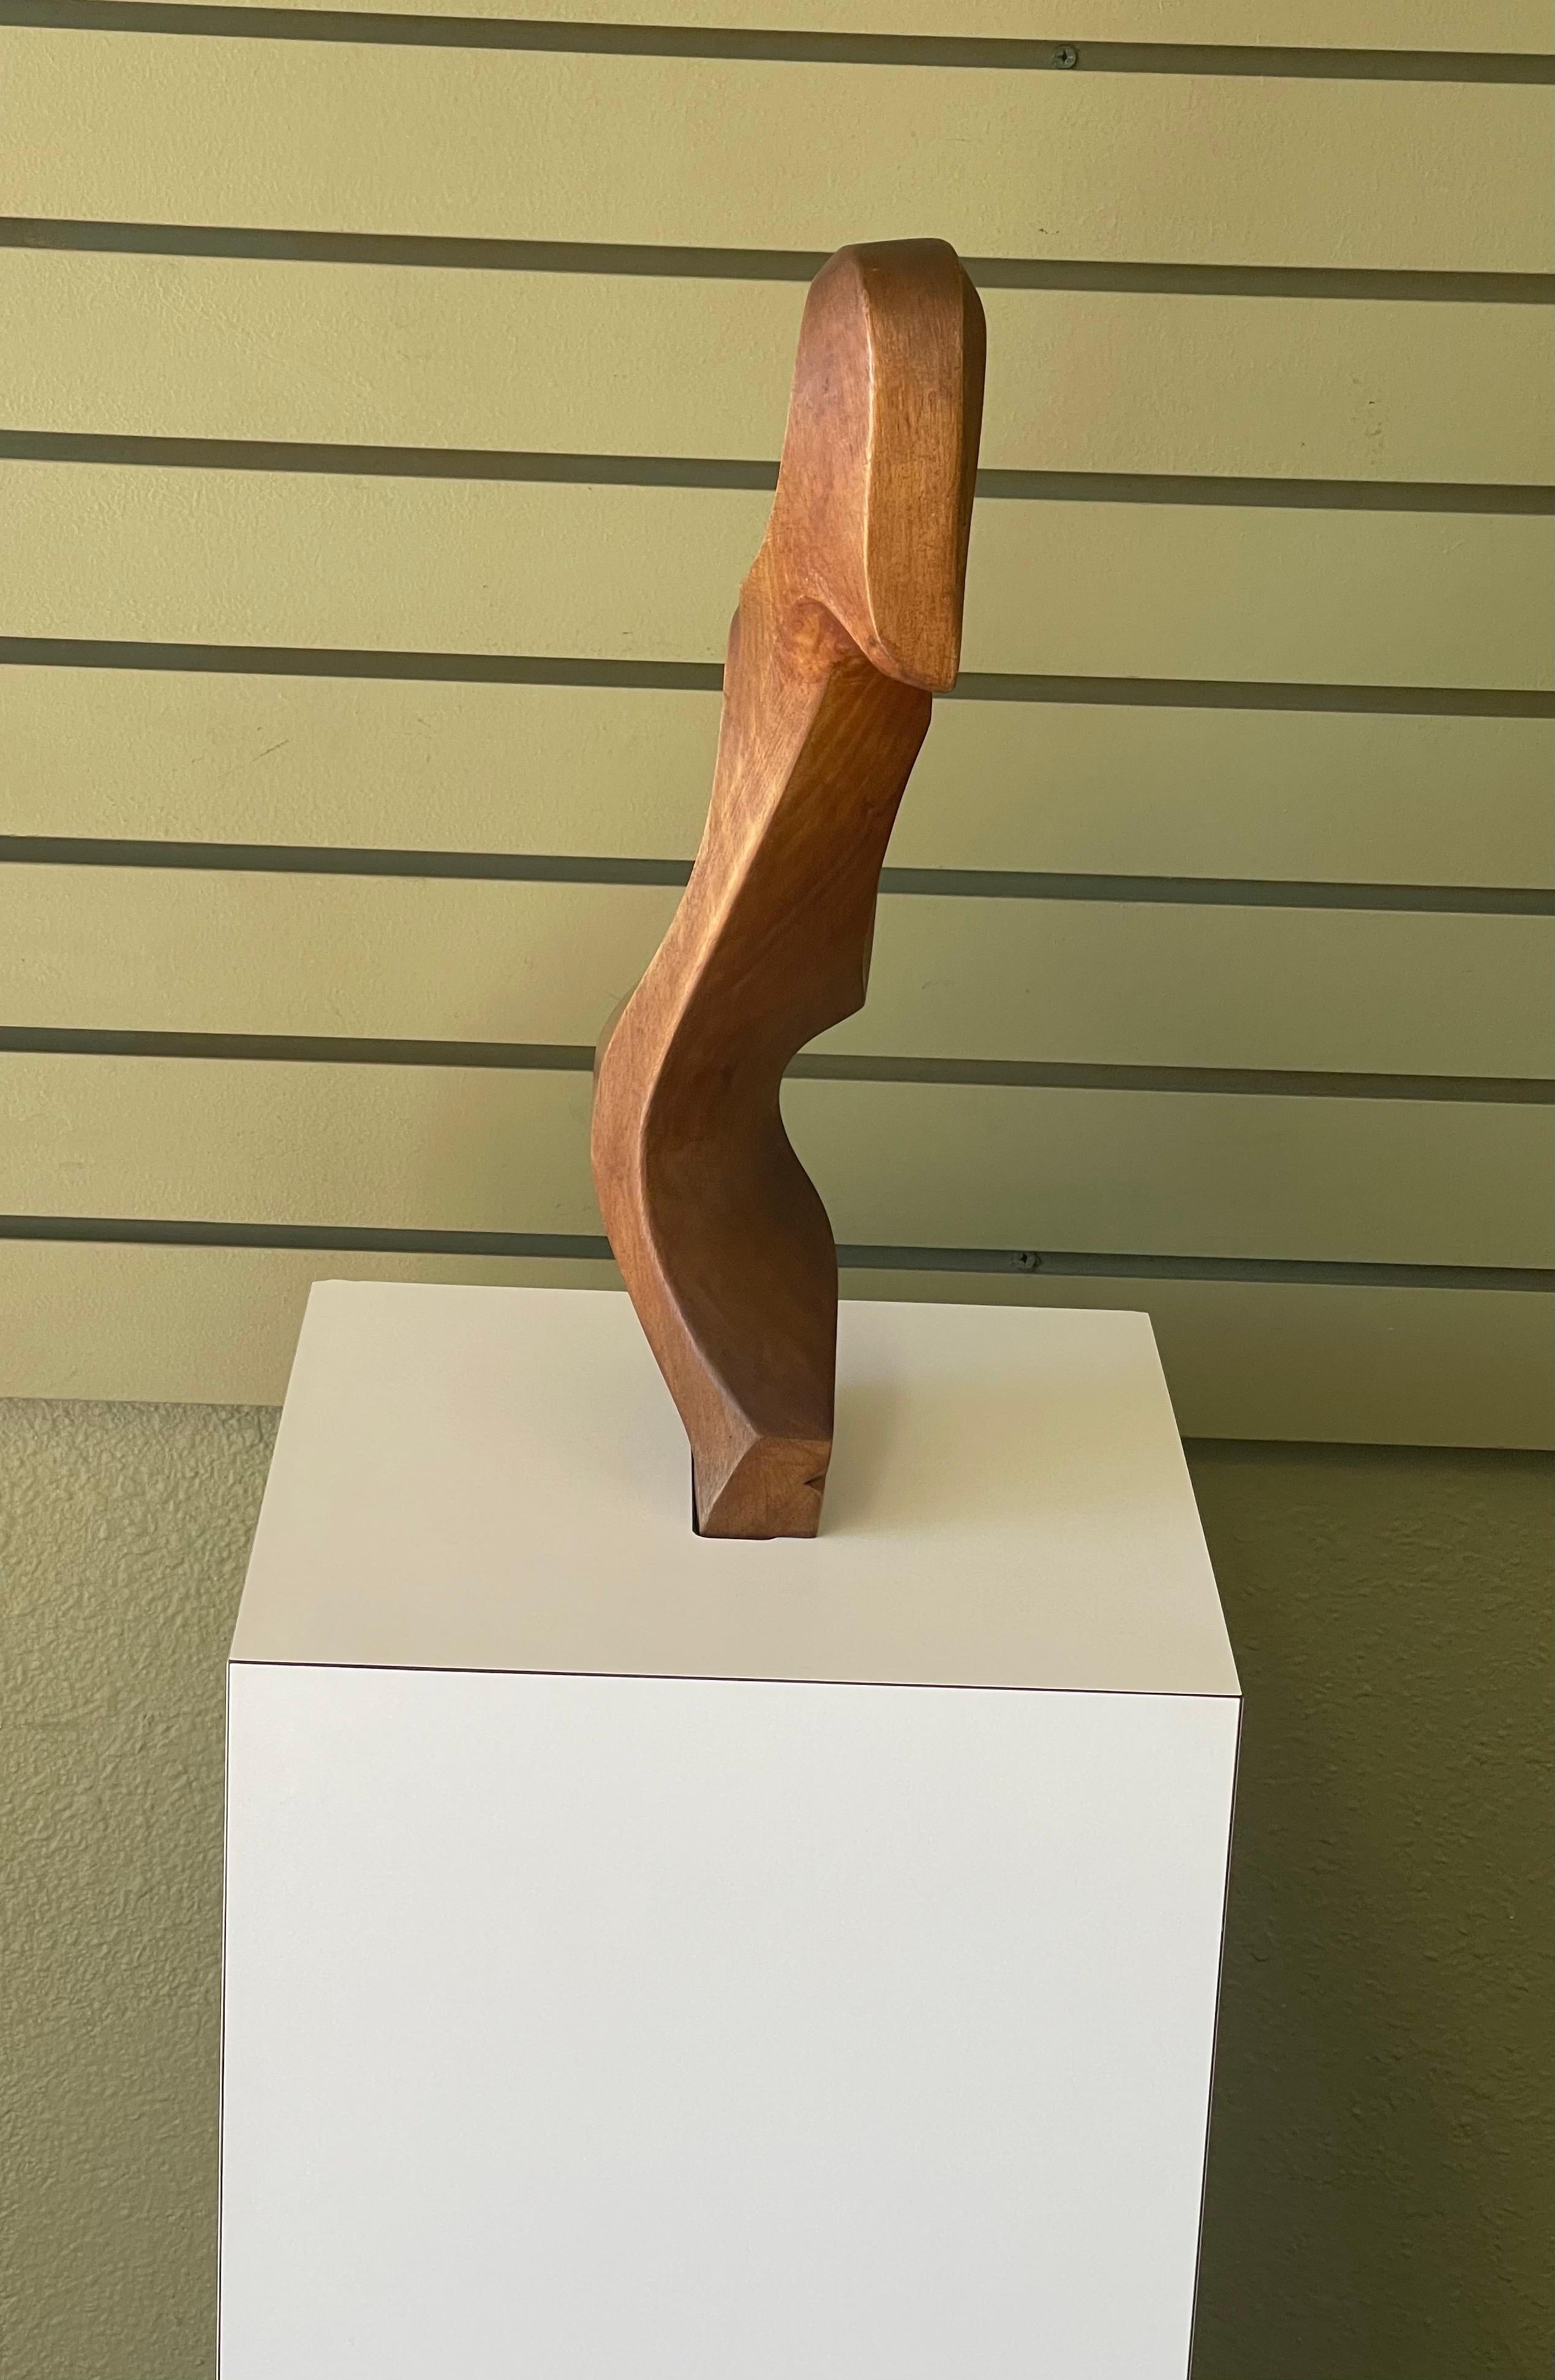 20th Century Venetian Abstract Solid Walnut Forcola 'Oarlock' Sculpture by Giuseppe Carli For Sale